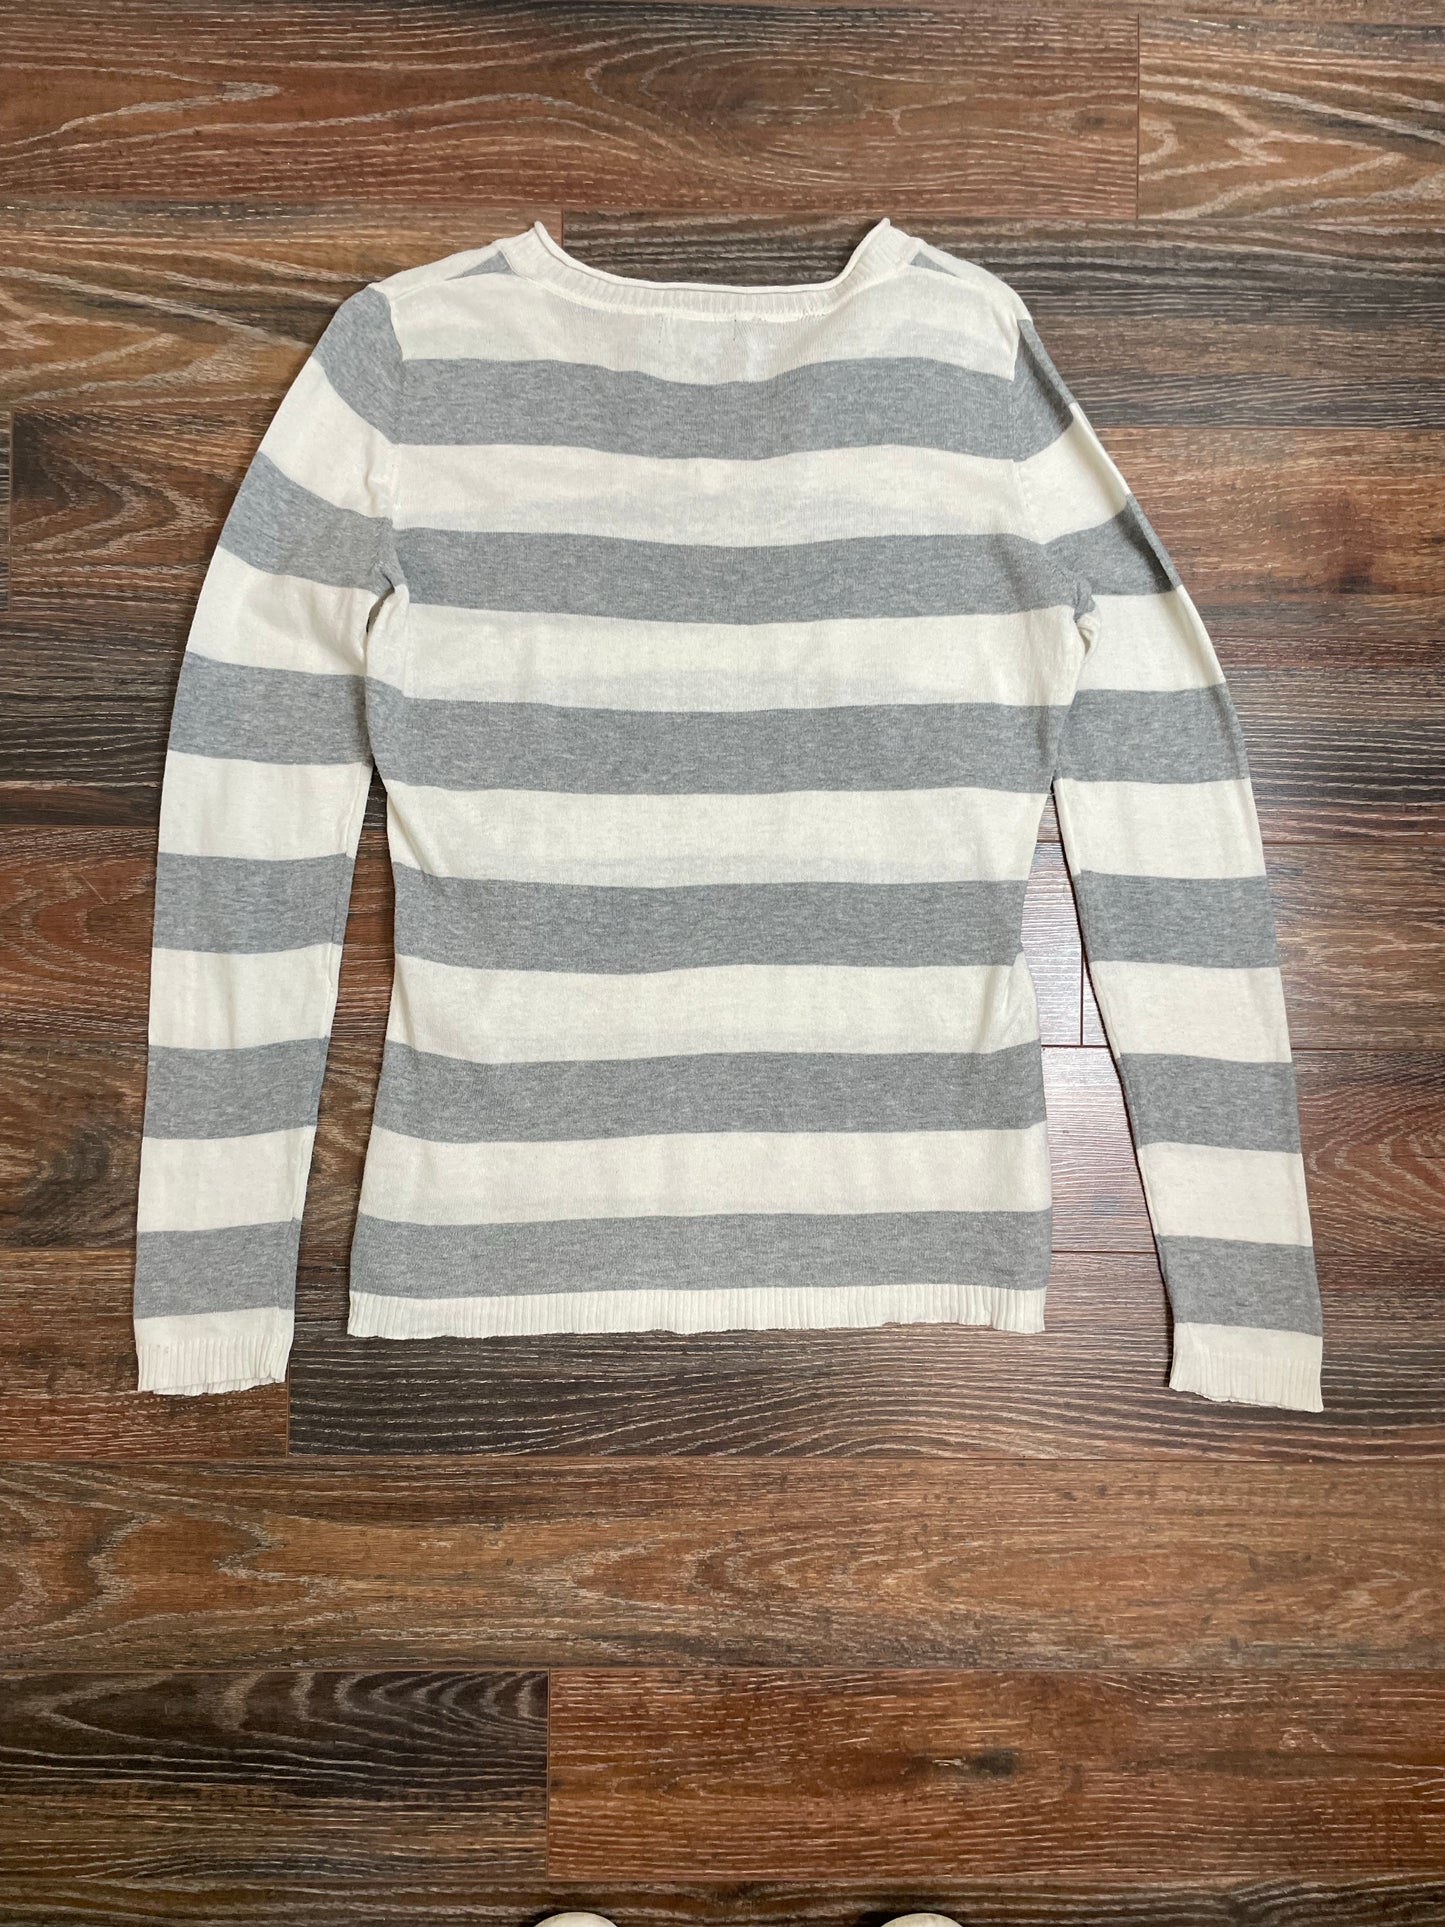 Grey and White Striped Shirt